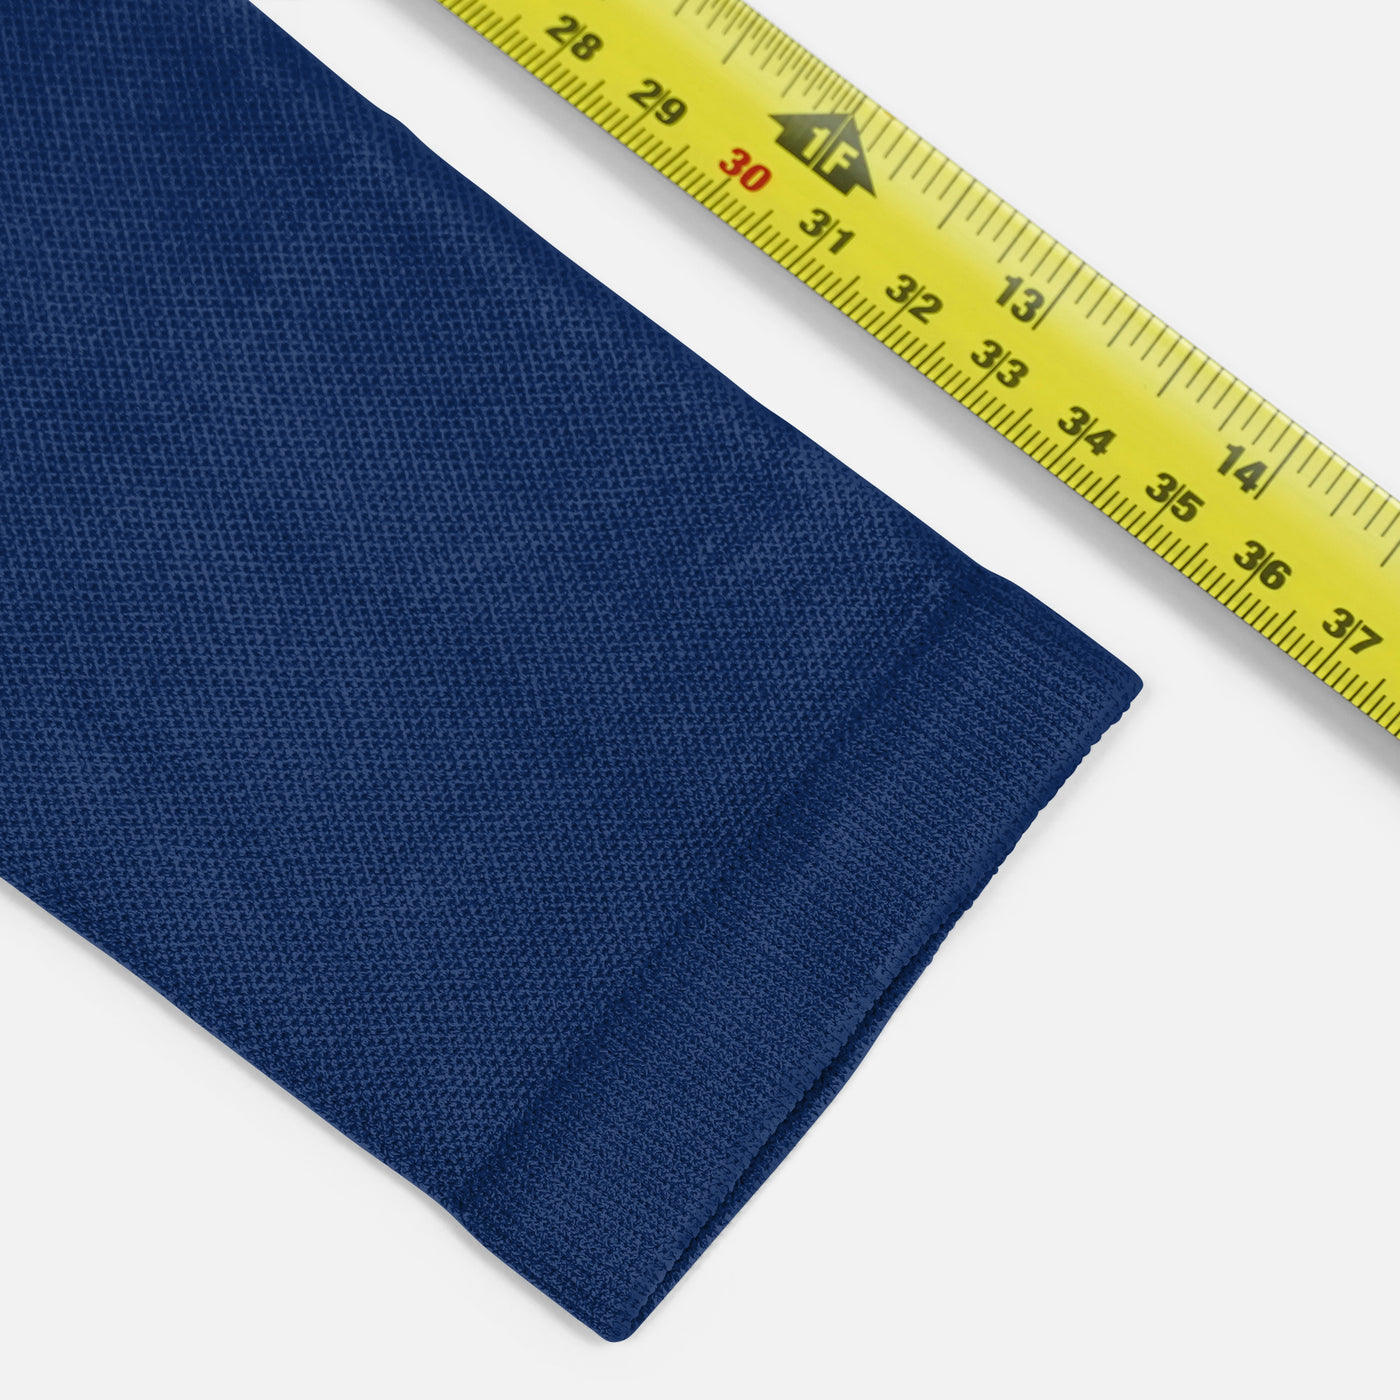 Hue Navy Blue One Size Fits All Arm Sleeve